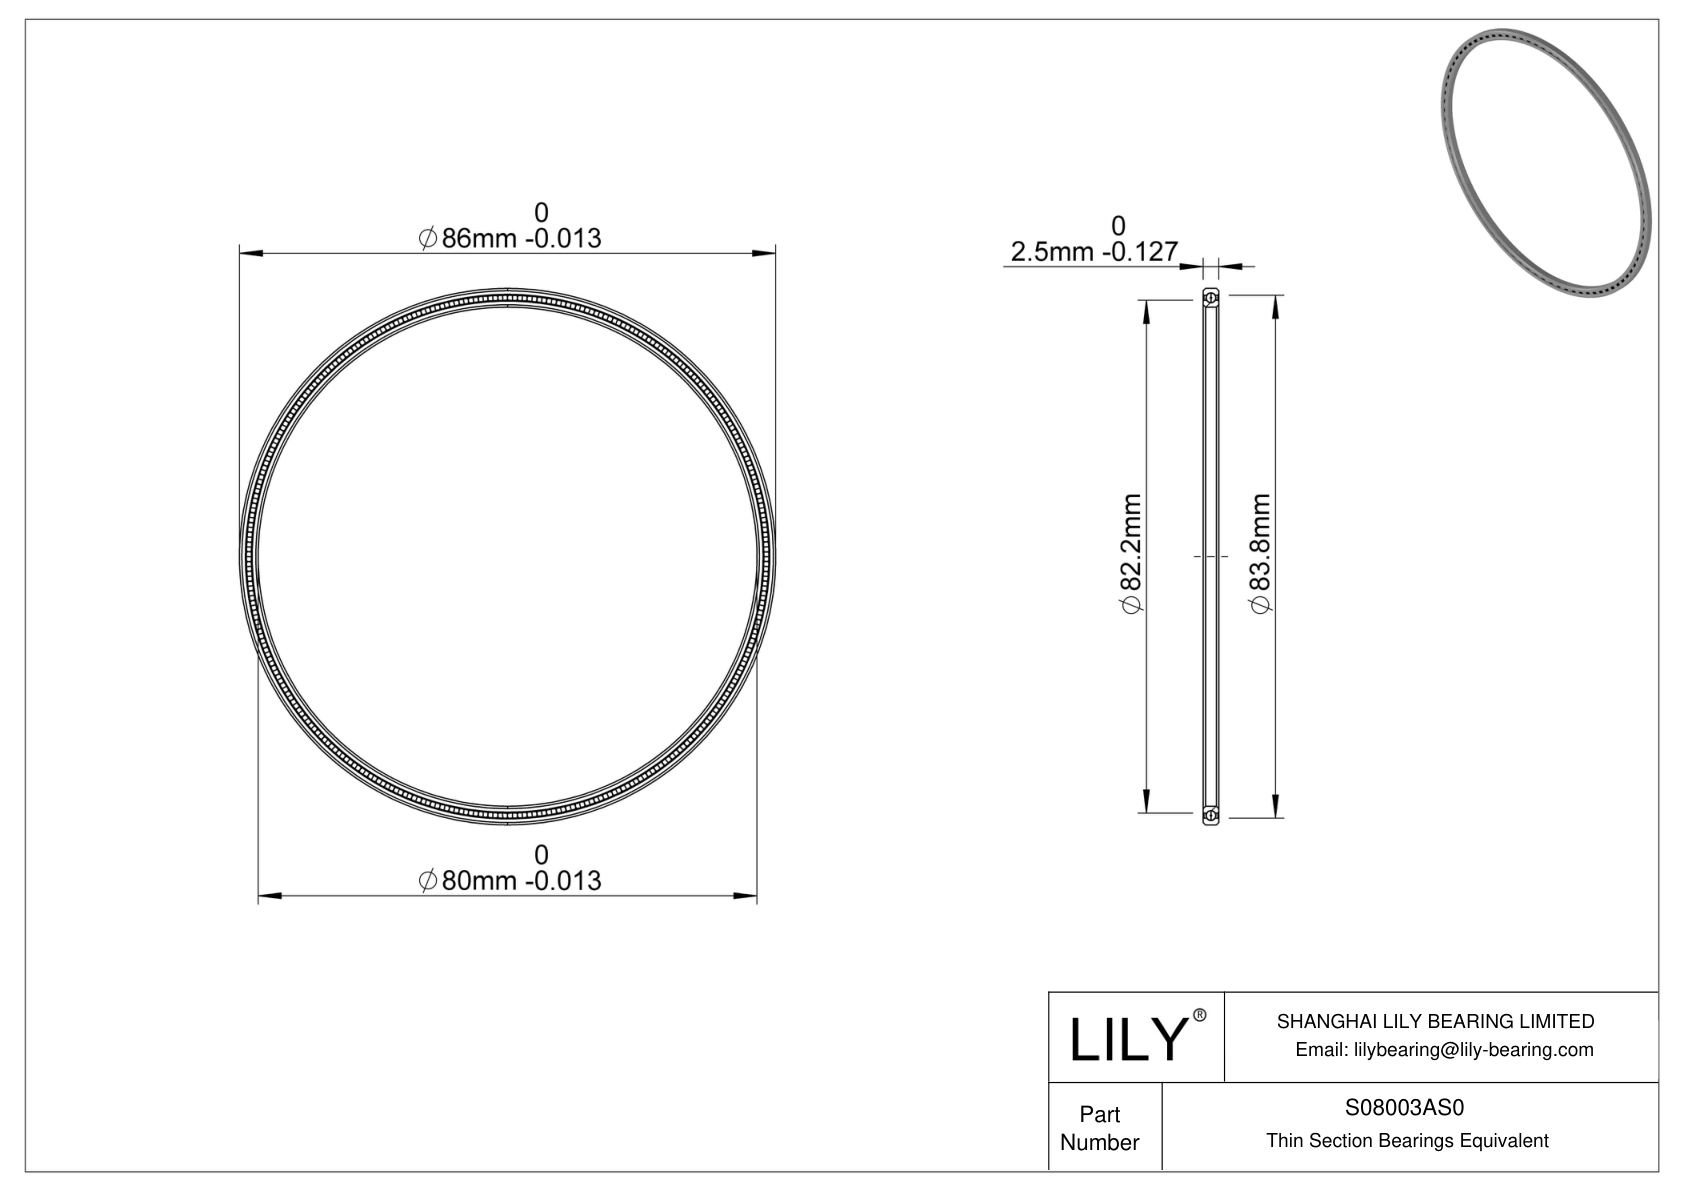 S08003AS0 Constant Section (CS) Bearings cad drawing